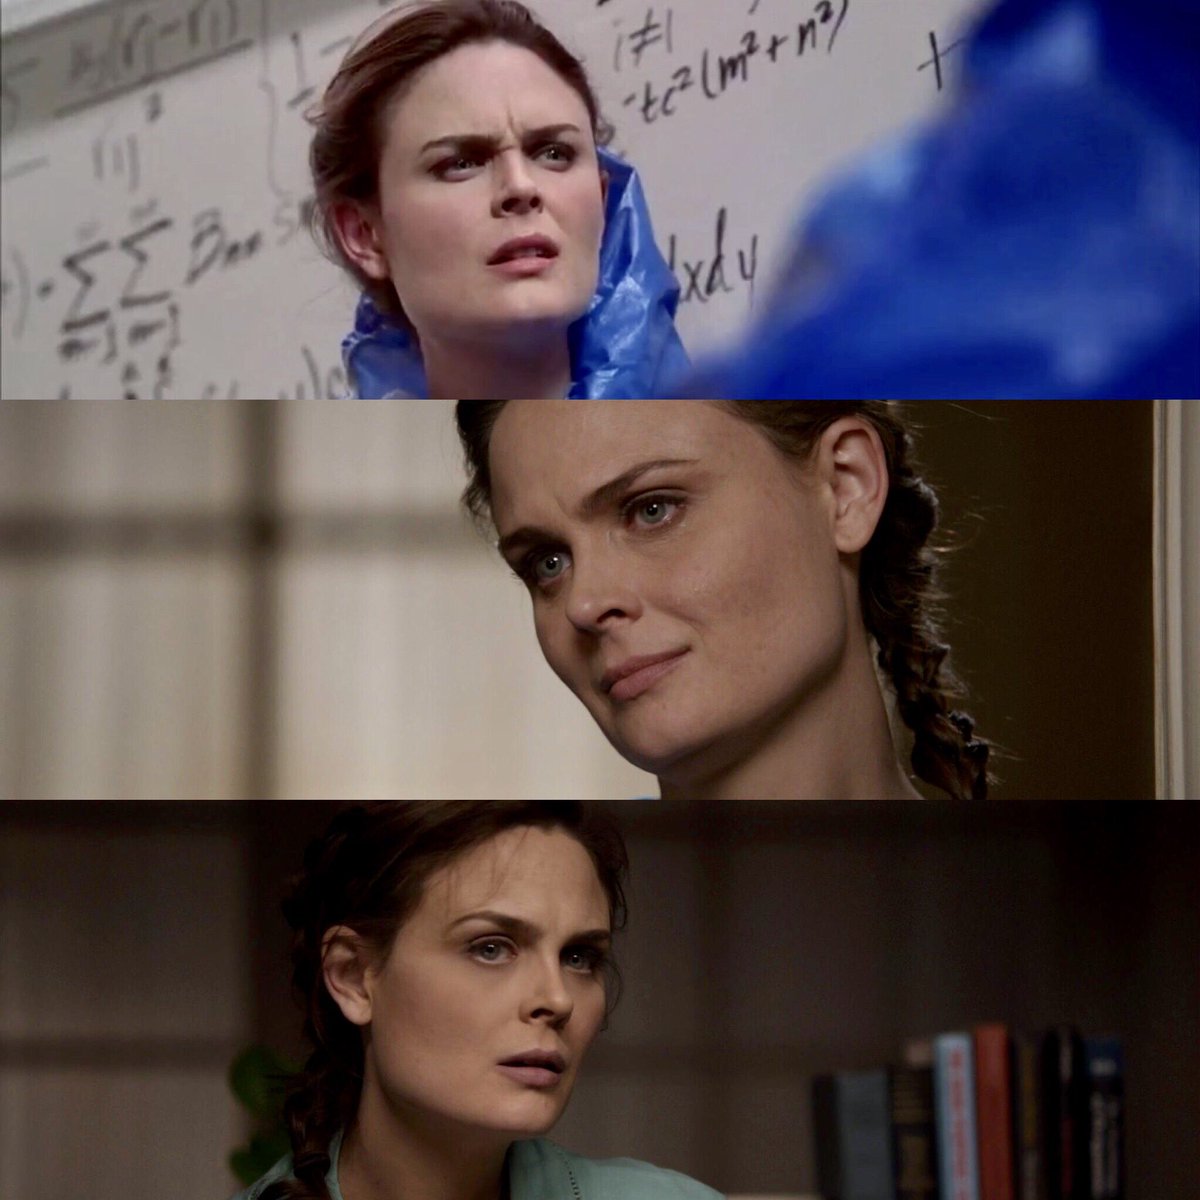 braids? shoutout to the bones hair and makeup crew for putting temperance brennan in braids and therefore giving us emily deschanel in braids